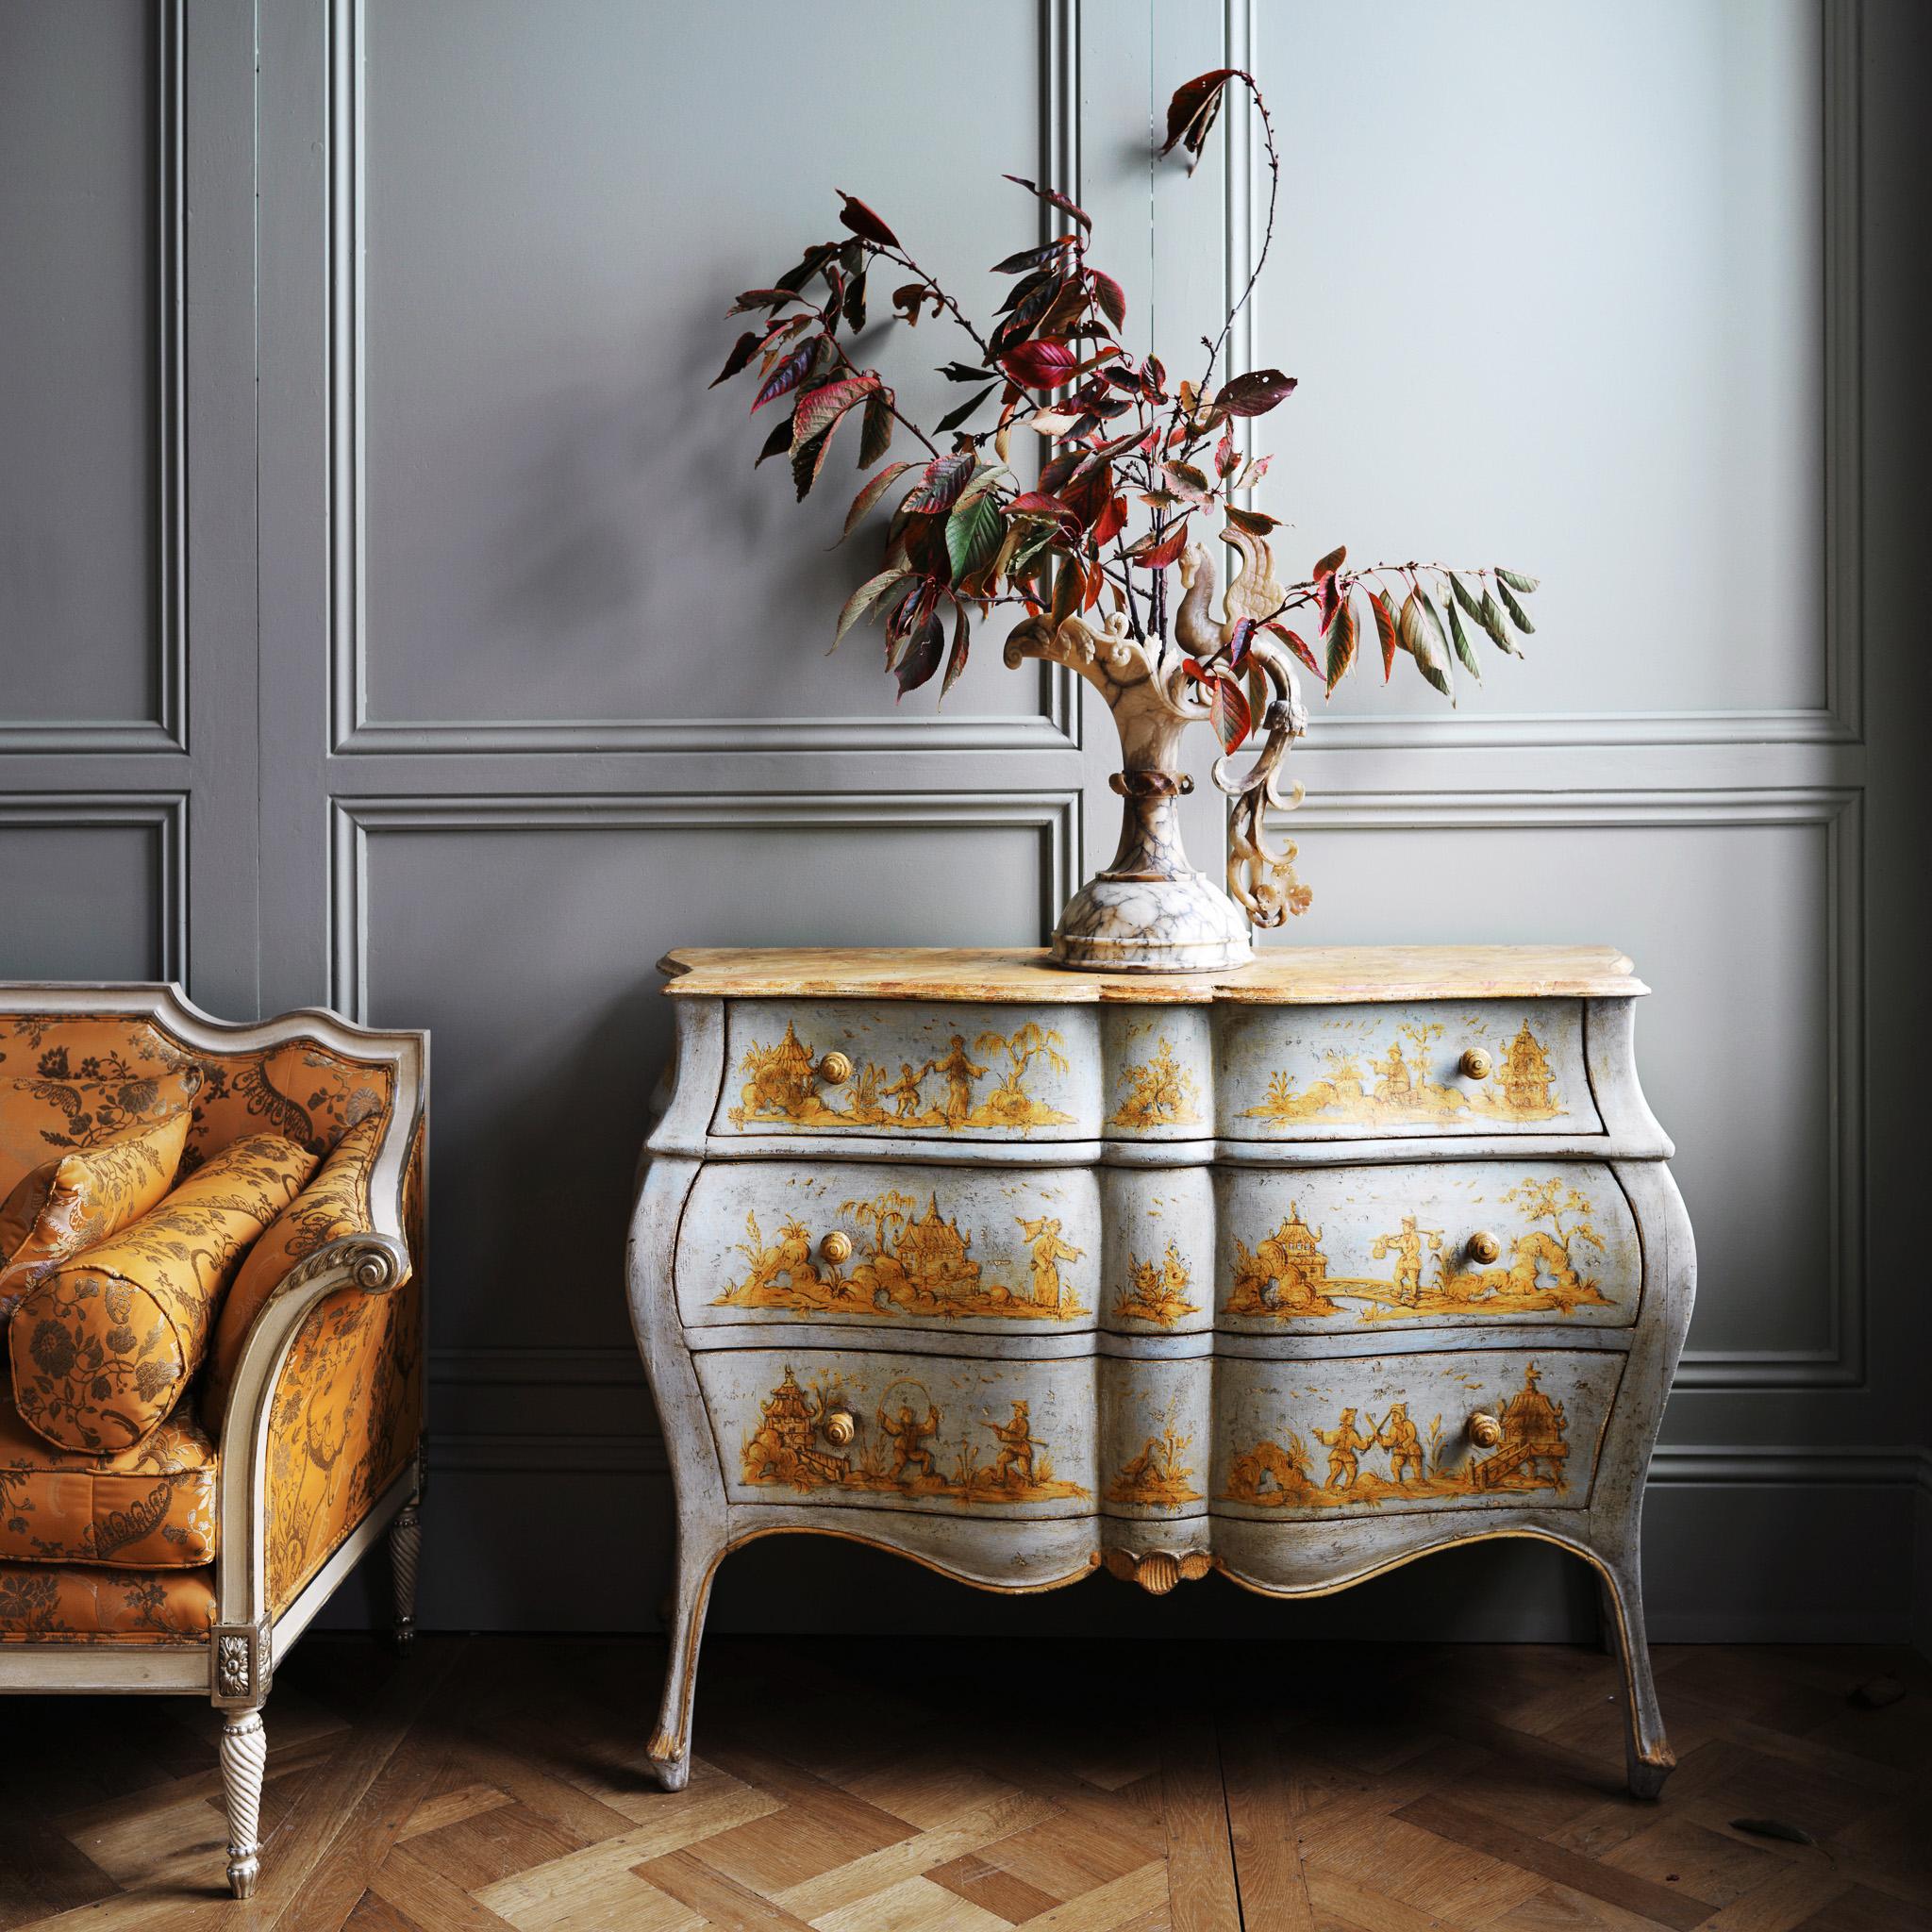 A late 19th century, Venetian chest of drawers with a curvaceous bombe style shape that plays with the light at all angles. The hand painted finish is in the Chinoiserie style featuring a luminous palette of a celeste blue and yellow ochres. The top